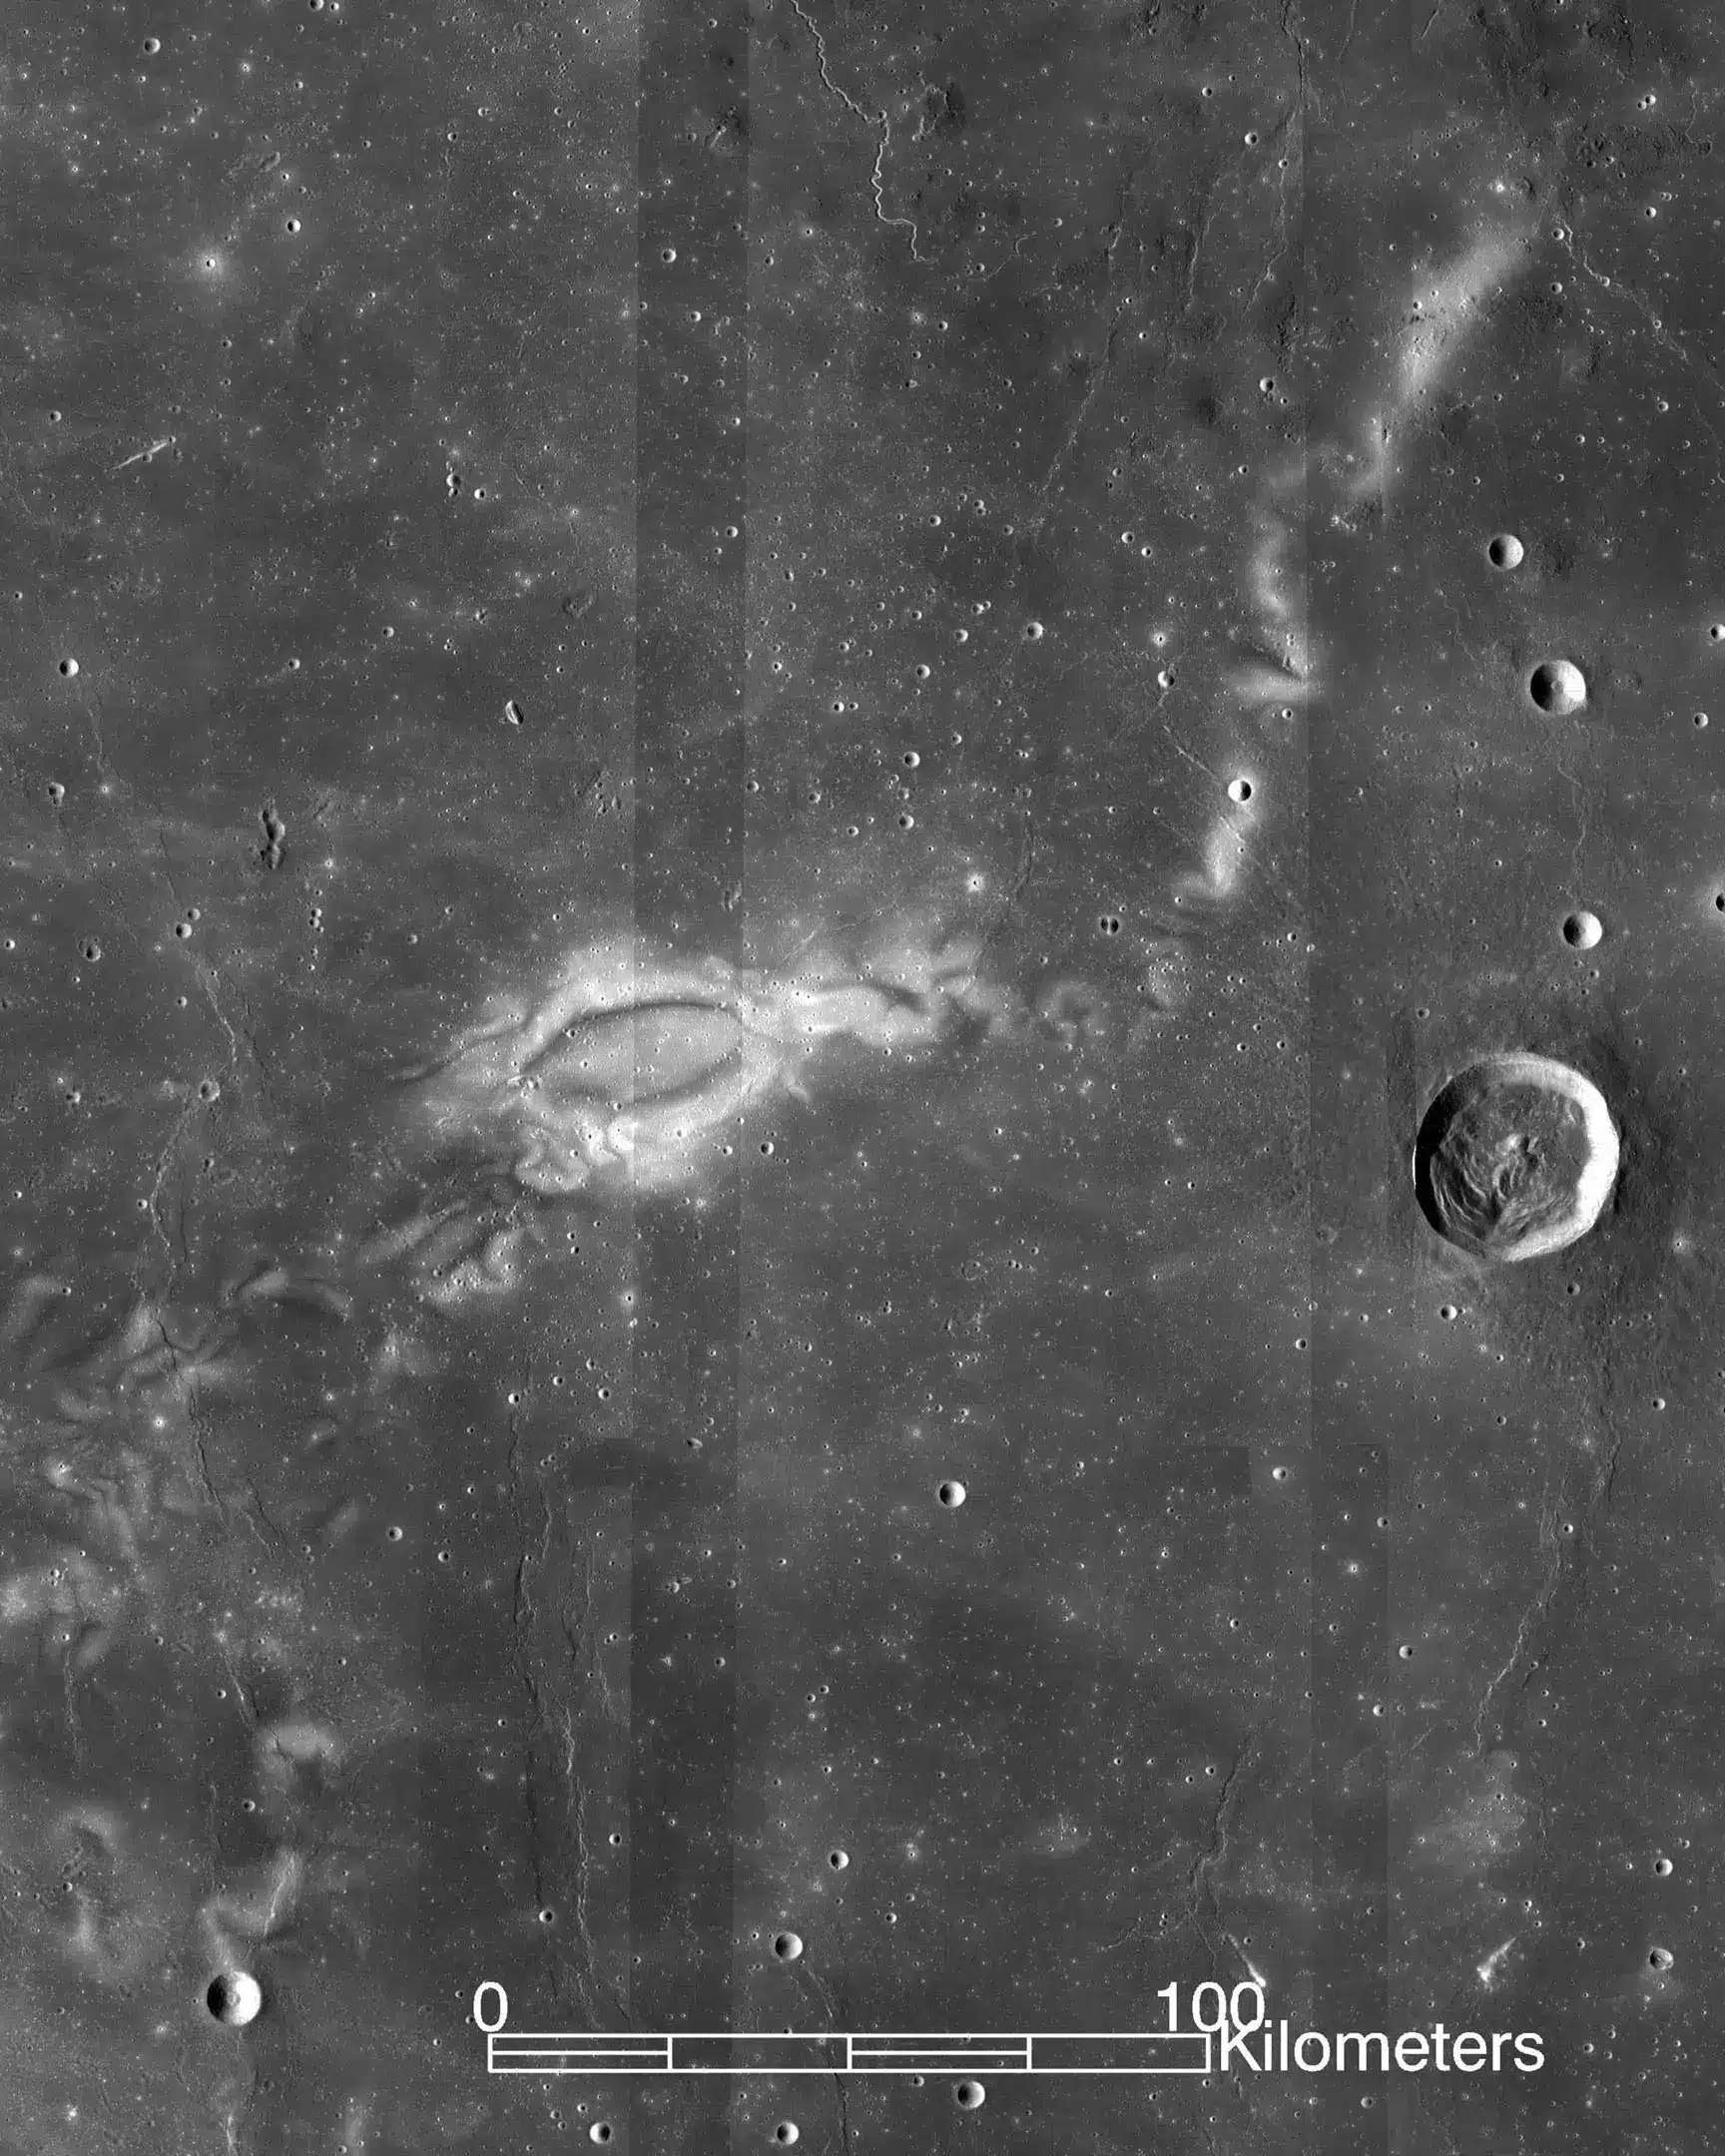 This image taken by the Lunar Survey Orbiter shows the gamma ray, a bright spot in the dark ocean of storms on the far side of the moon. The orbiter's view reveals tendrils that stretch several hundred kilometers across. Lunar vortices are bright, often twisting shapes that look like an abstract painting. They are unique to the Moon. Credit: NASA LRO WAC science team